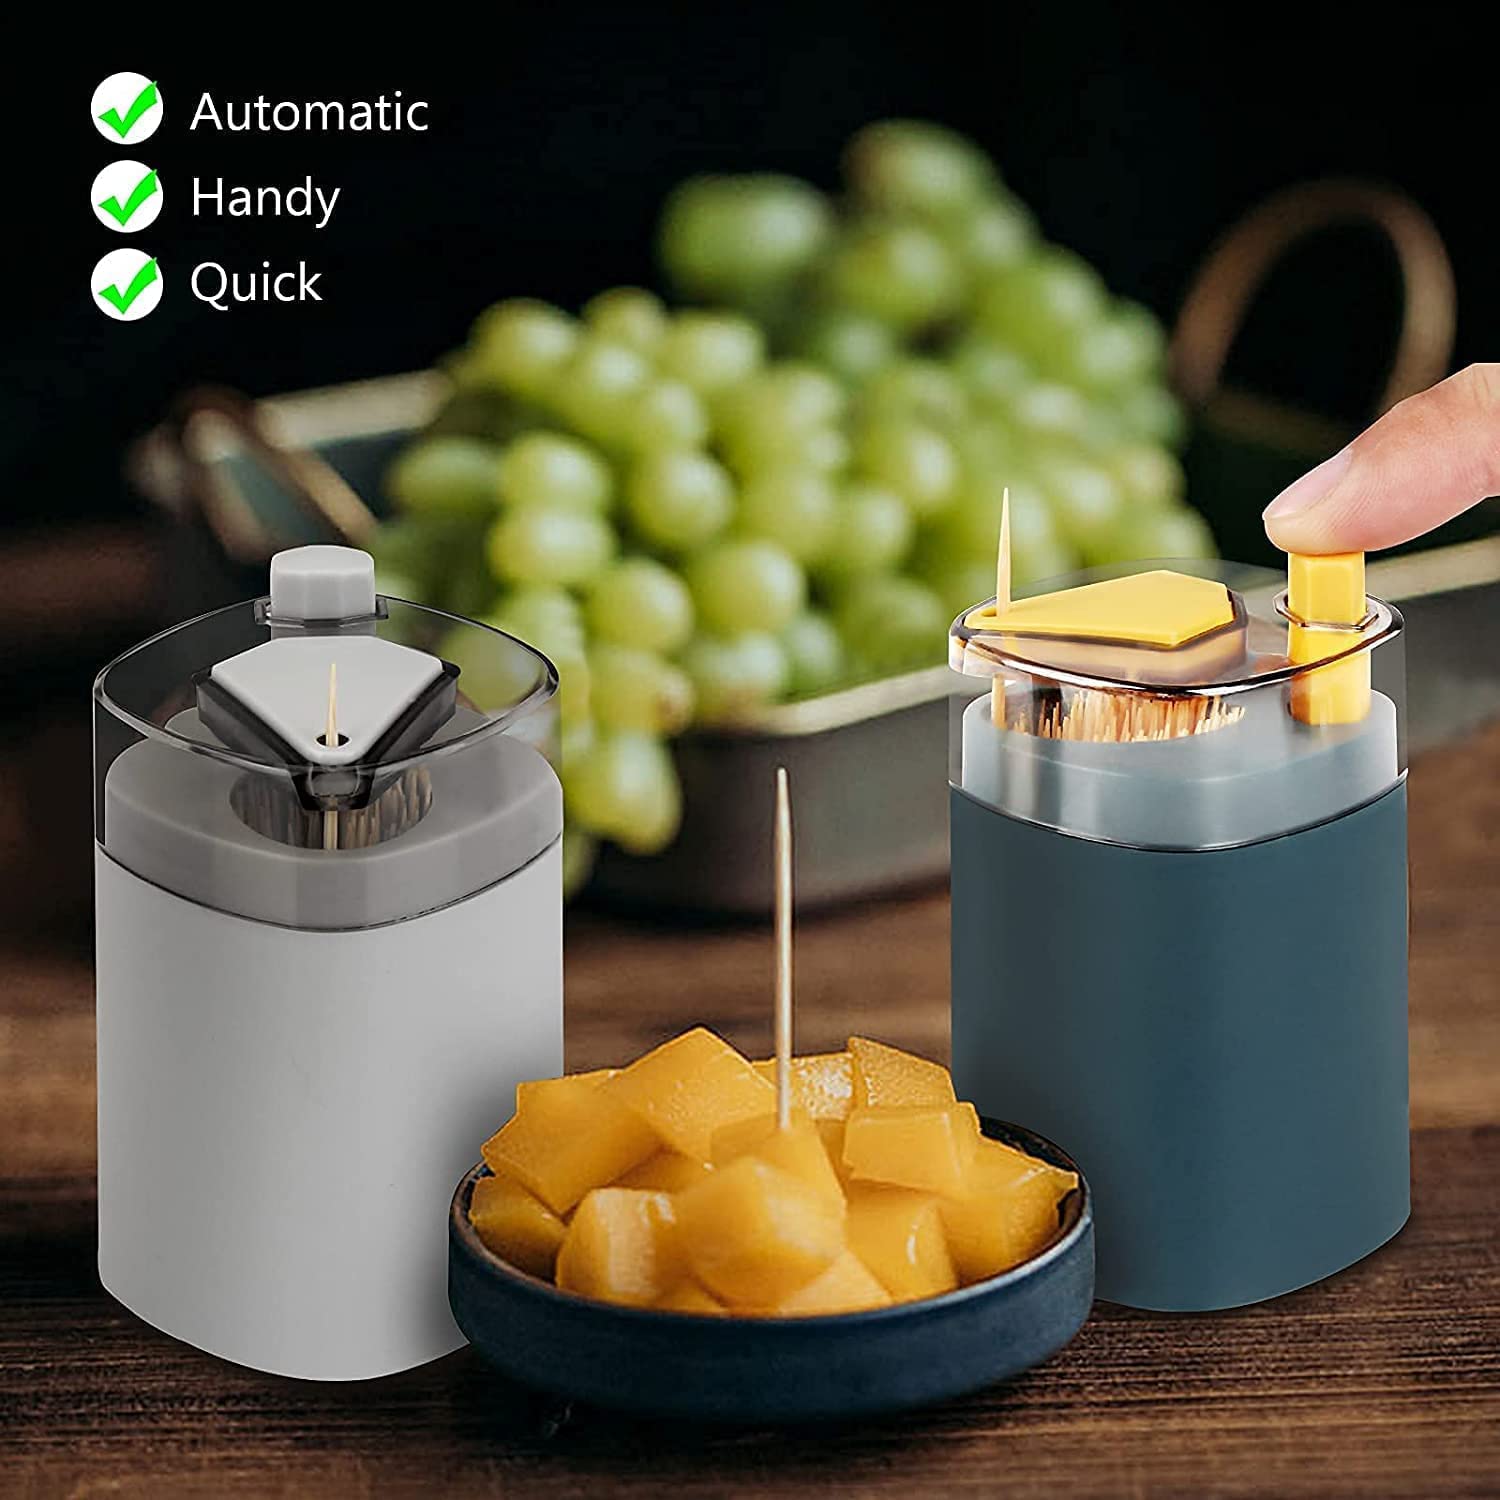 4005L Toothpick Holder Dispenser, Pop-Up Automatic Toothpick Dispenser for Kitchen Restaurant Thickening Toothpicks Container Pocket Novelty, Safe Container Toothpick Storage Box. DeoDap